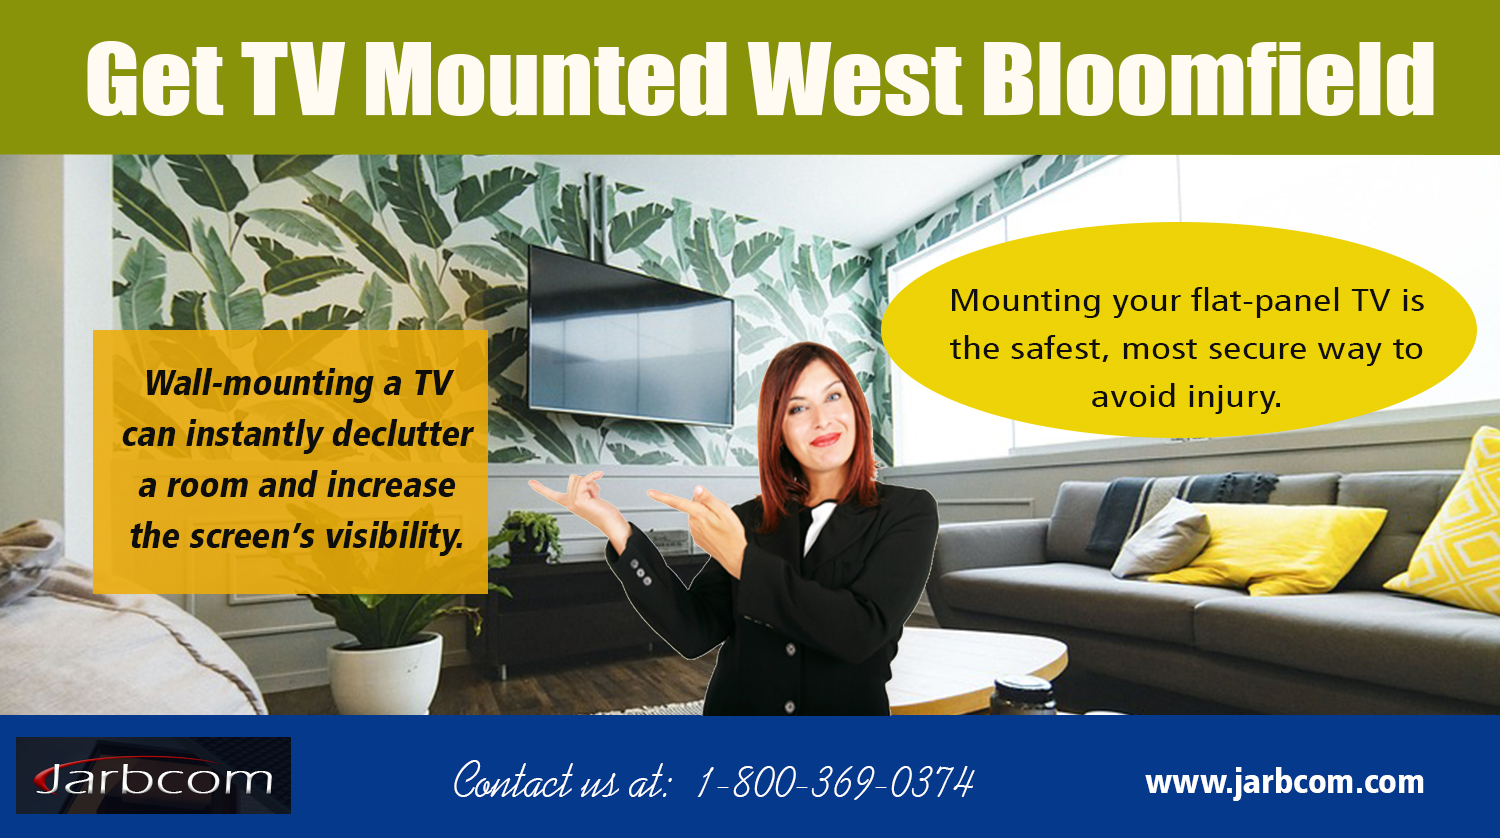 Get TV Mounted West Bloomfield